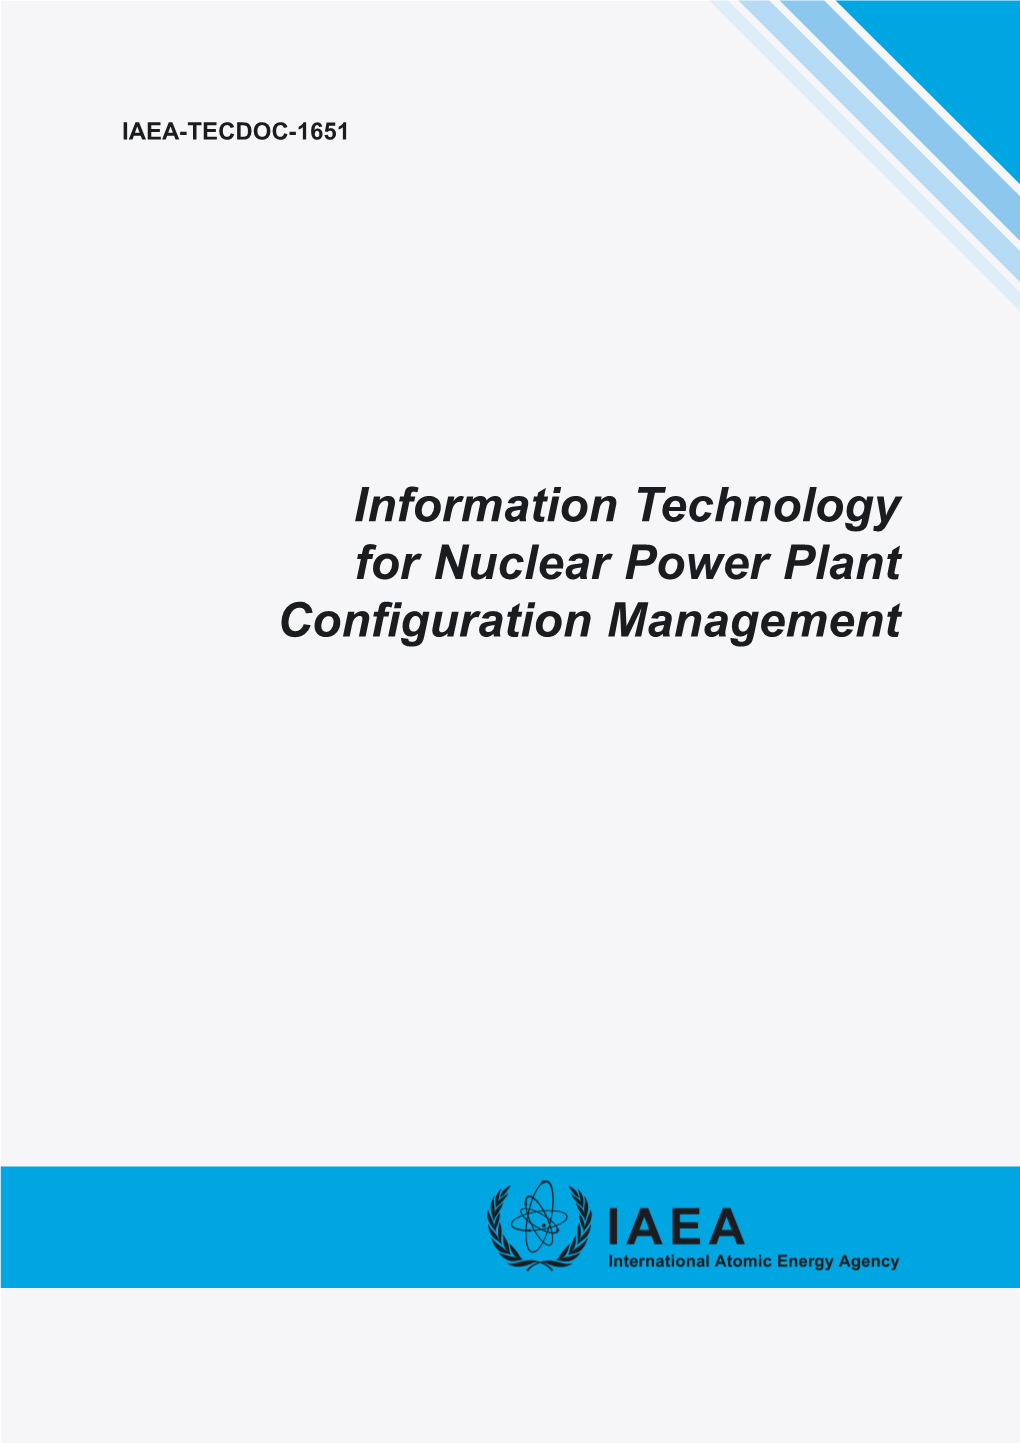 Information Technology for Nuclear Power Plant Configuration Management